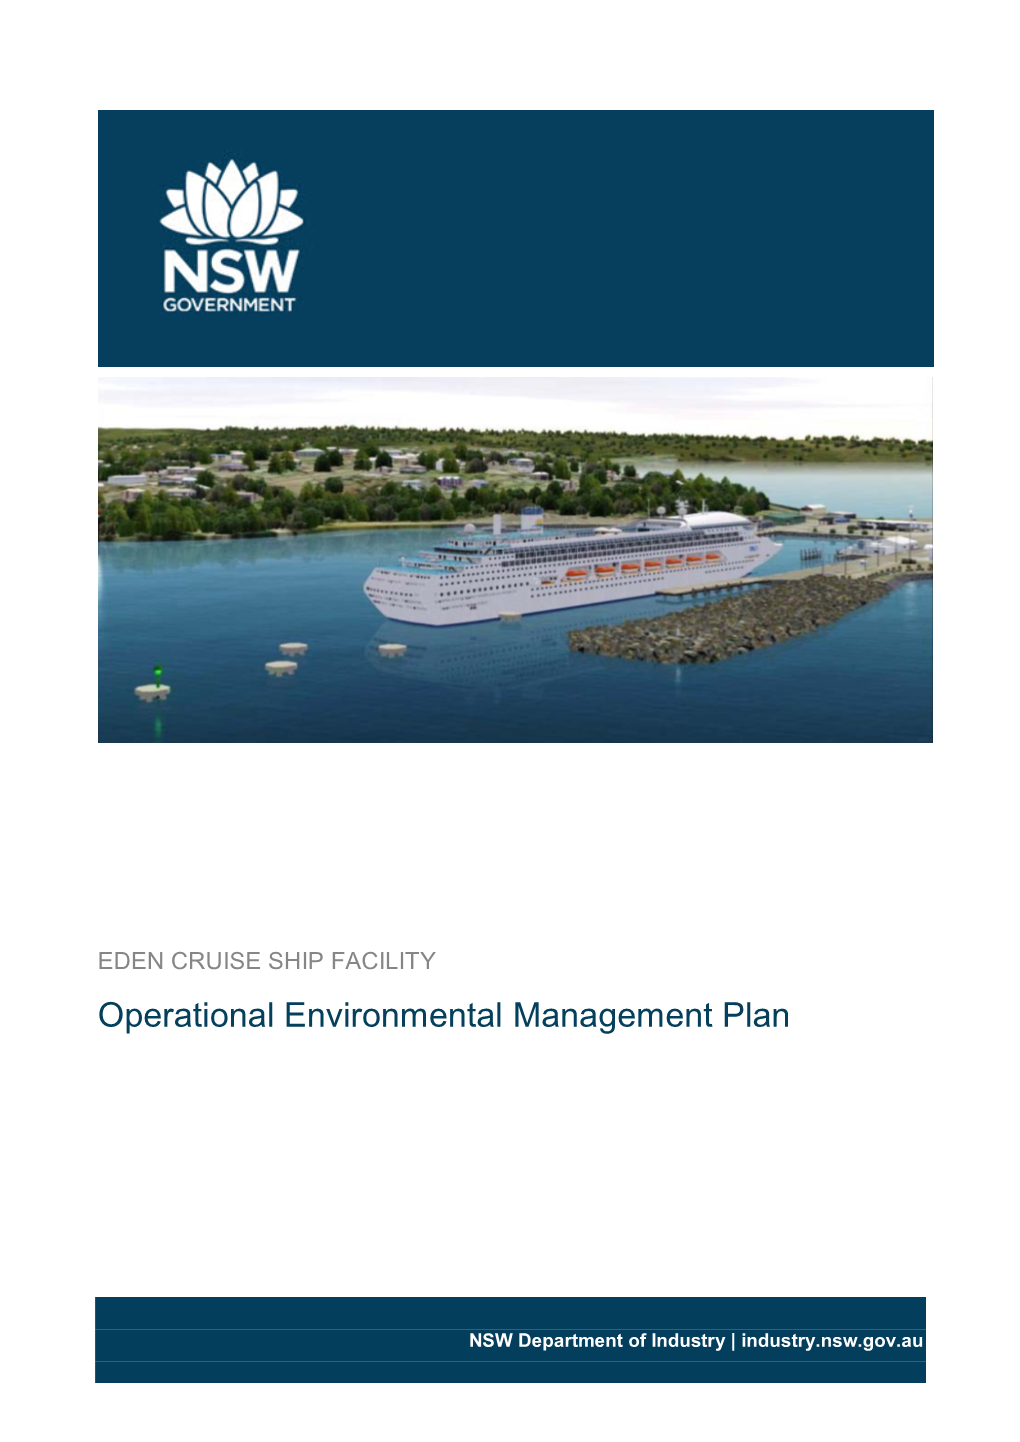 Operational Environmental Management Plan (OEMP) Has Been Prepared in Accordance with the Requirements of Conditions D1 and D2 of the SSI Approval No